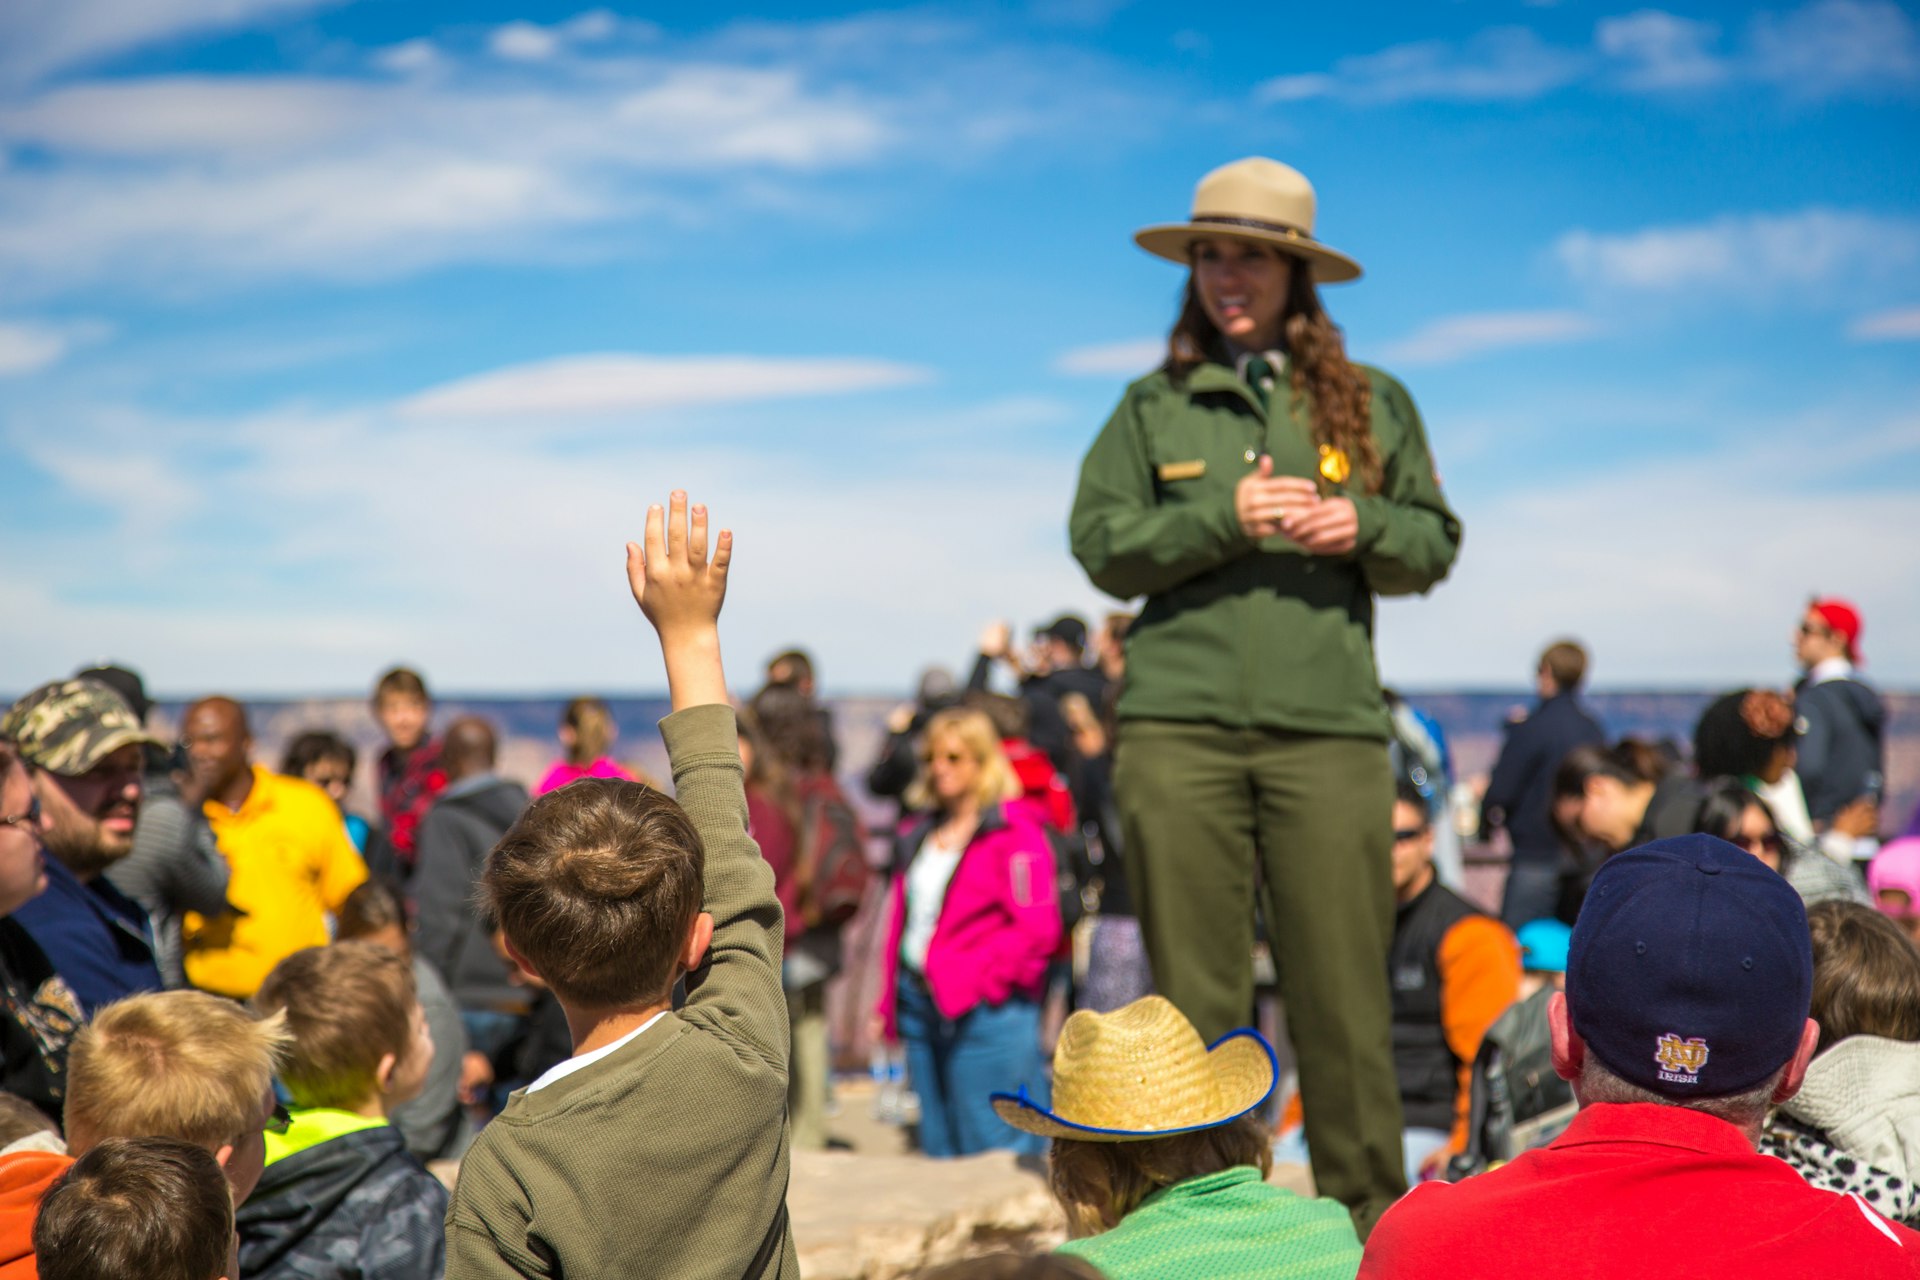 A kid with his hand raised and a park ranger replying to his question at the south rim of Grand Canyon National Park, Arizona